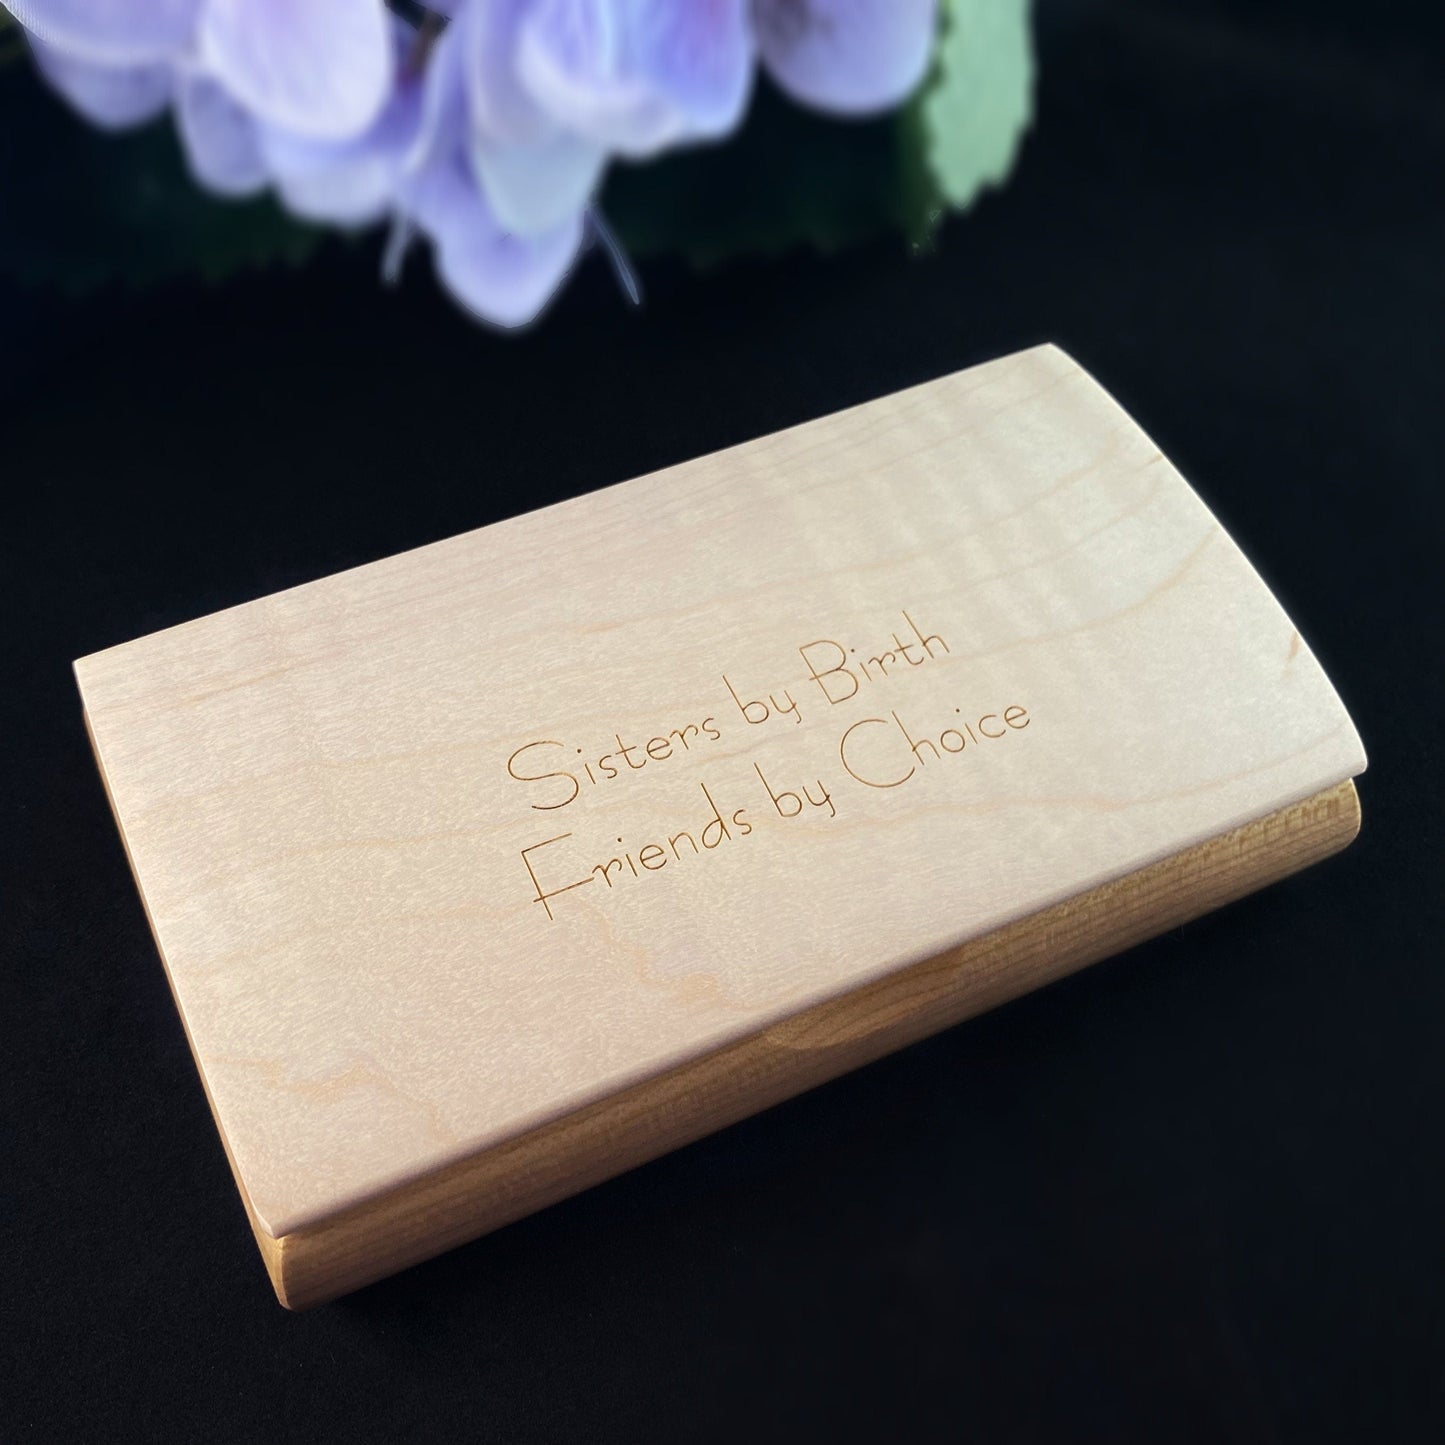 Sisters by Birth Quote Box, Handmade Wooden Box with Curly Maple and Cherry, made in USA